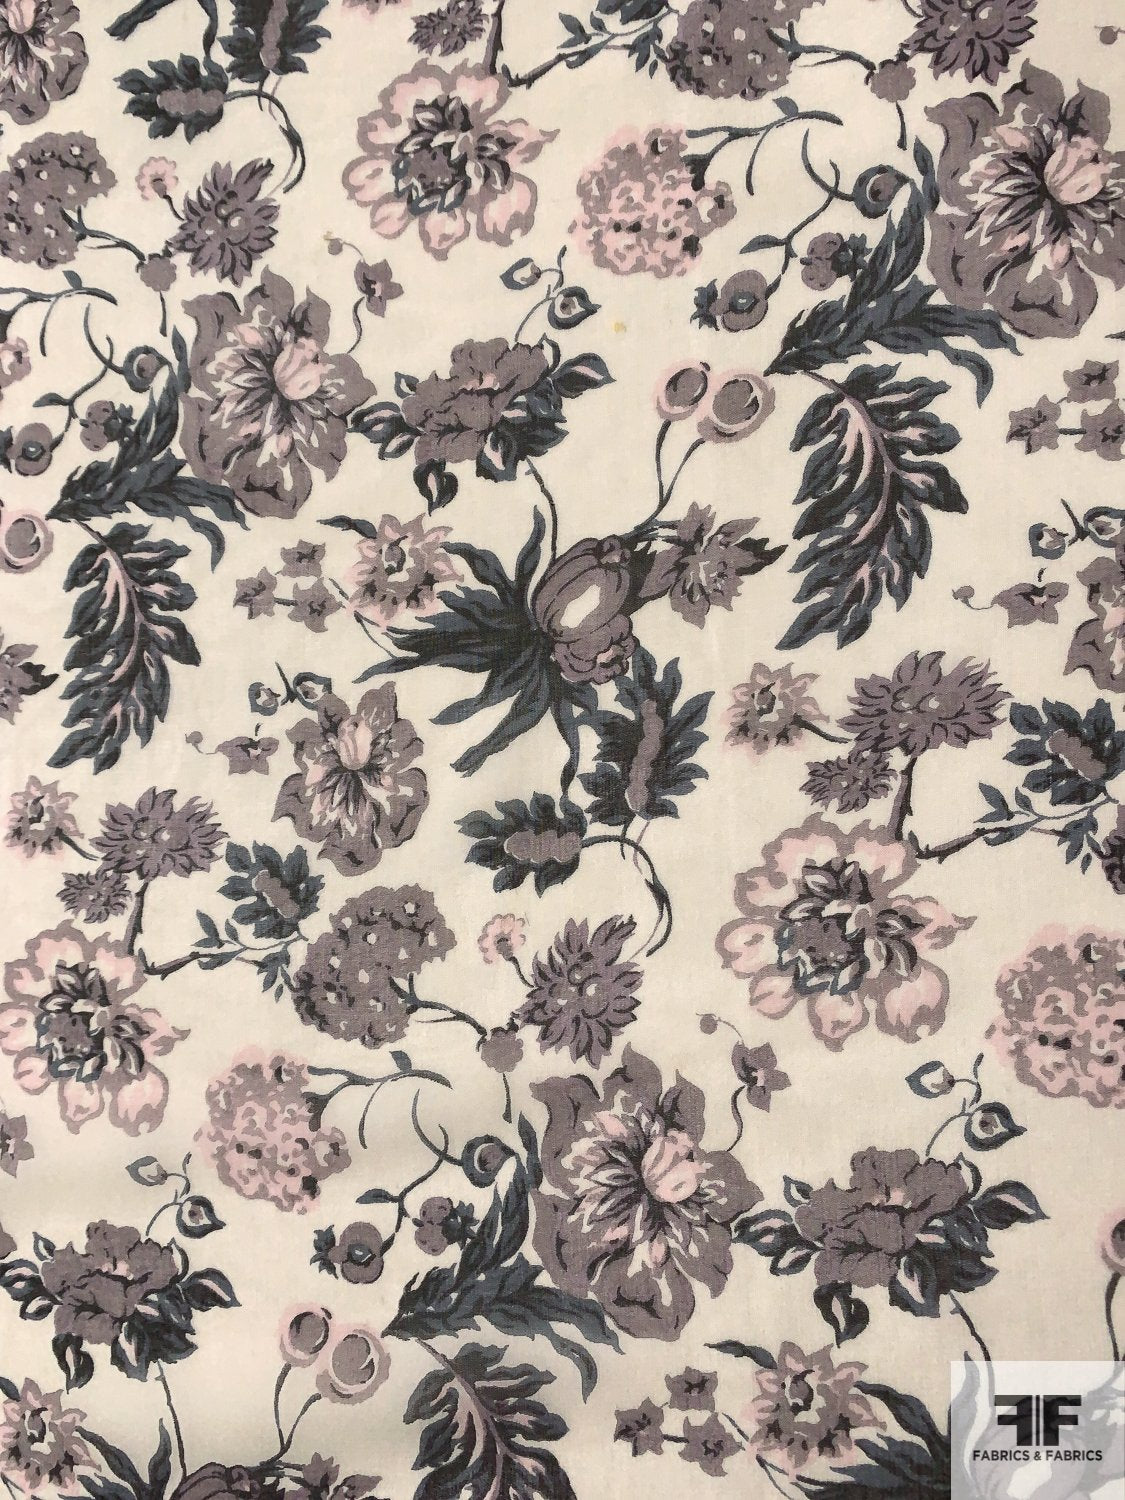 Intricate Floral Printed Silk Chiffon - Shades of Grey / Dusty Treal / Off-White